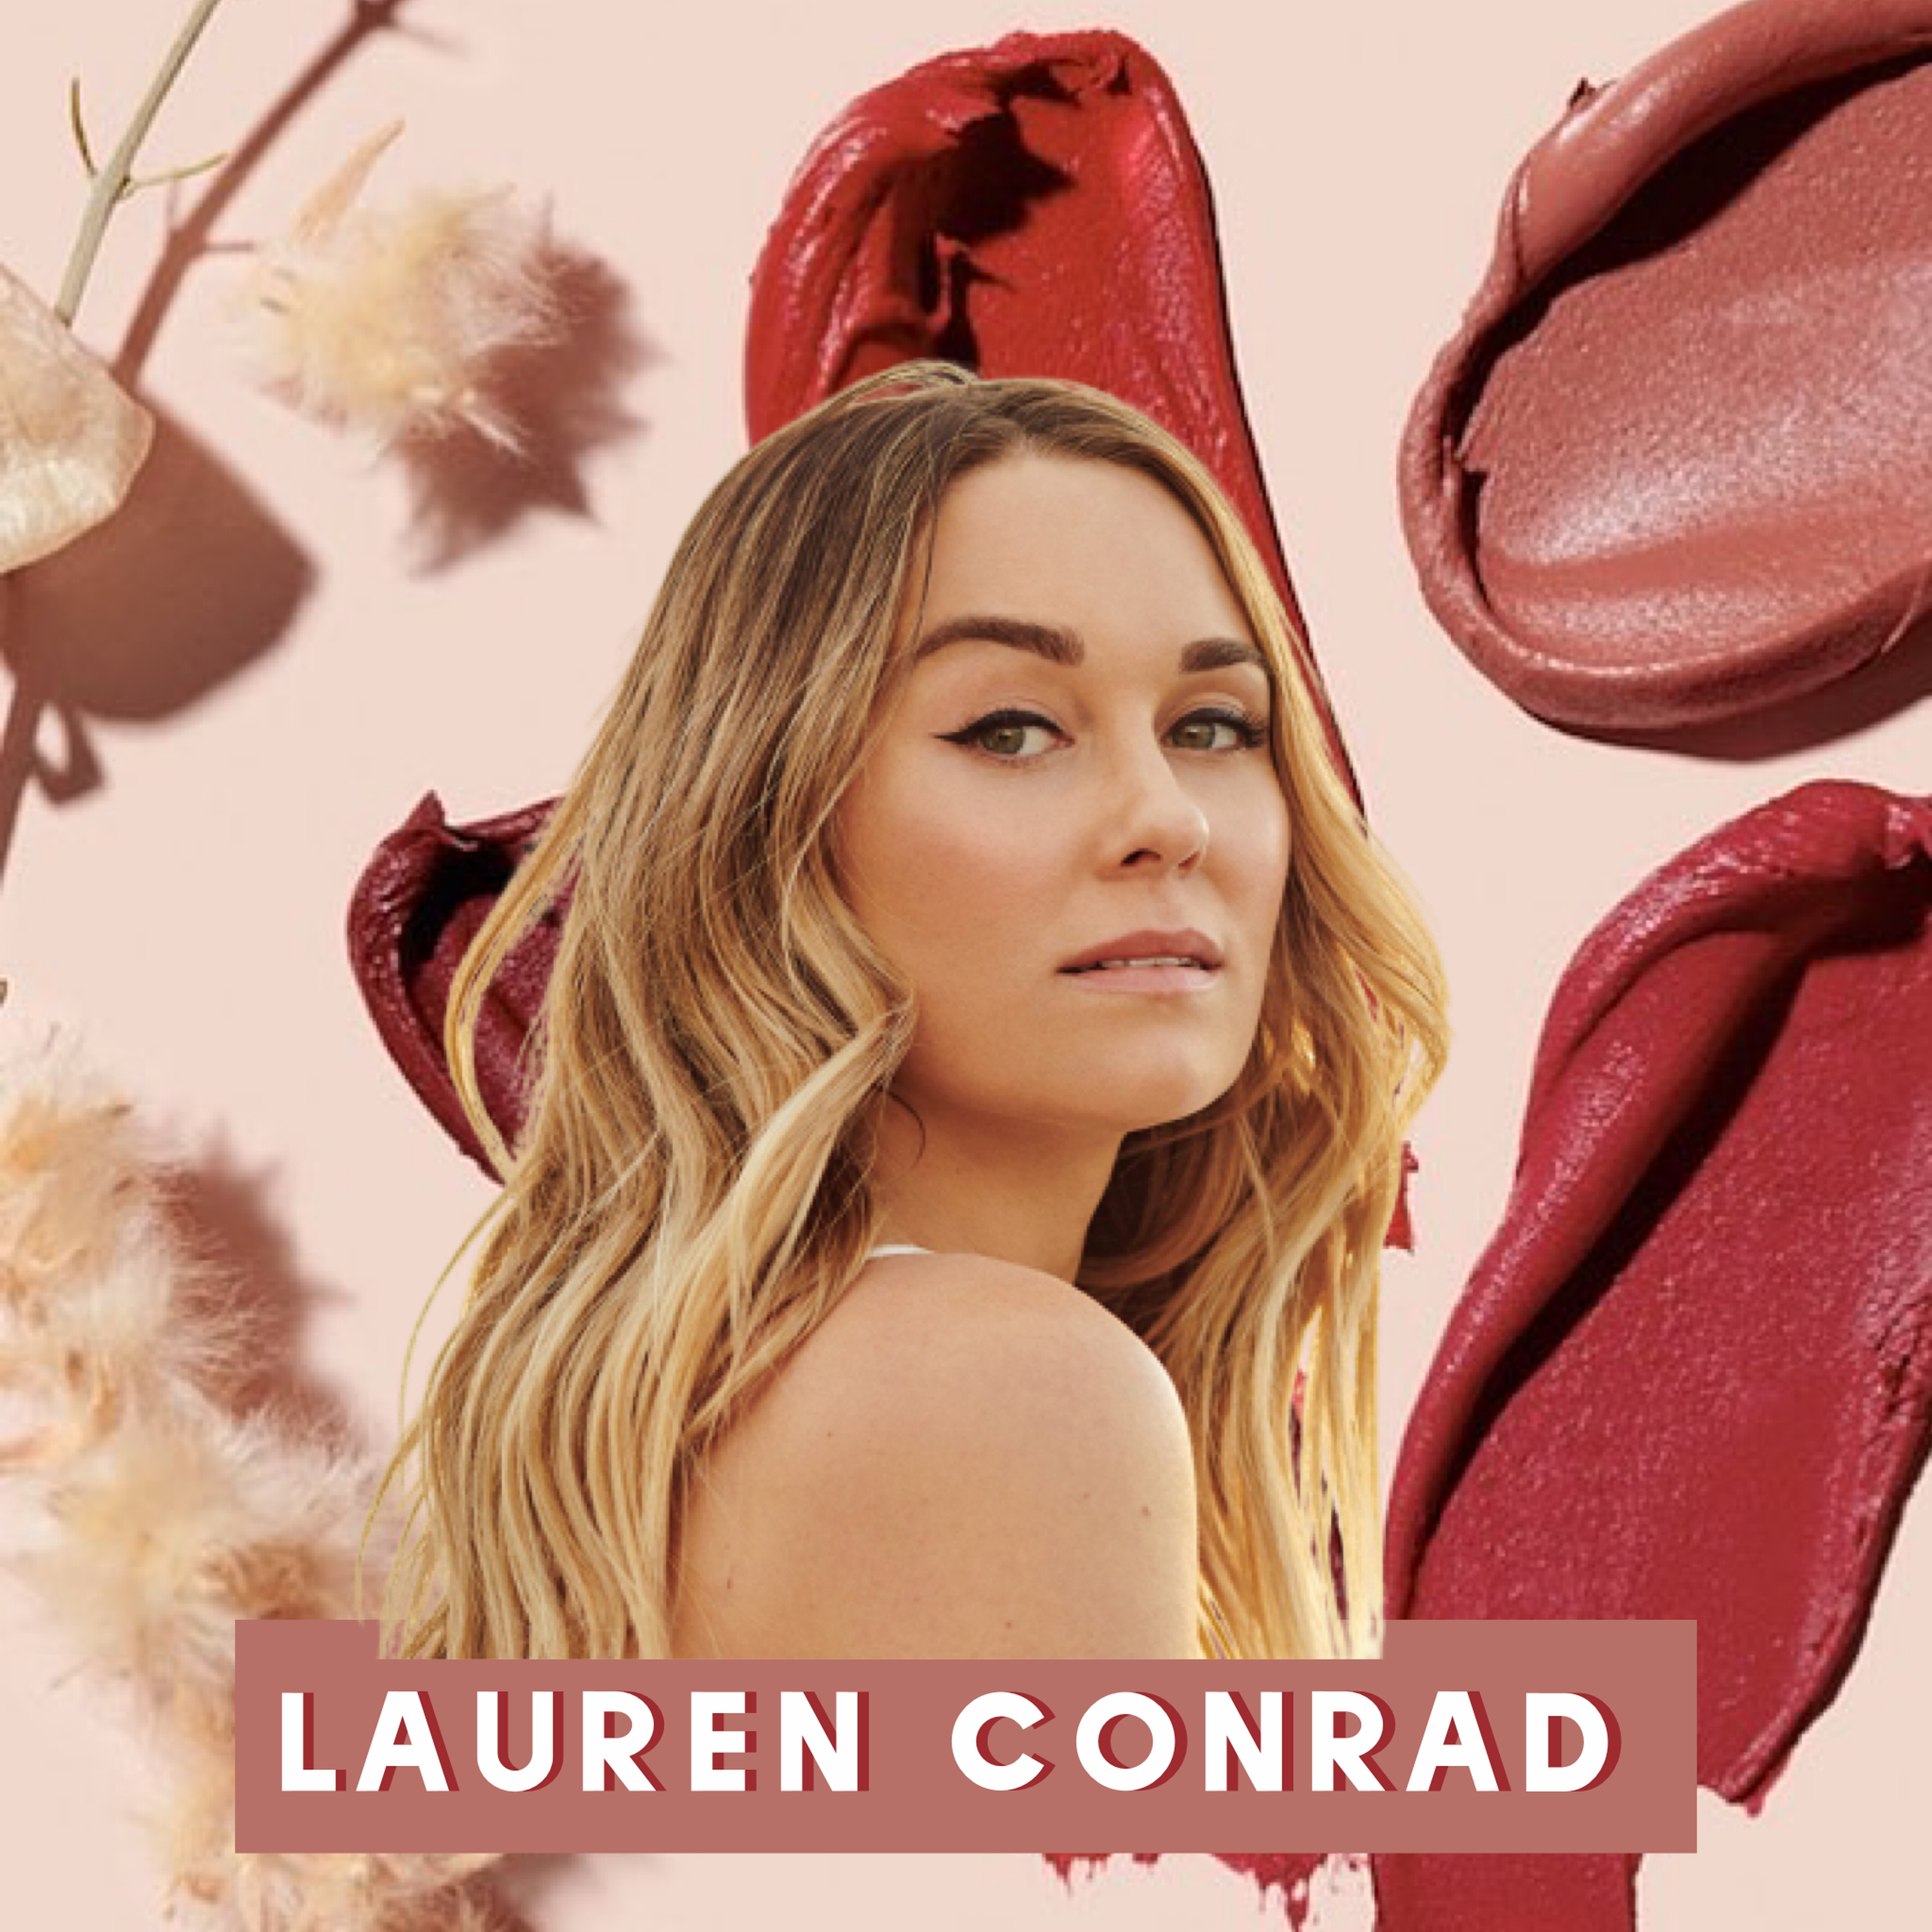 Lauren Conrad on Her Years-In-The-Making Beauty Line, Packing Her Own PR Mailers, Melasma and More